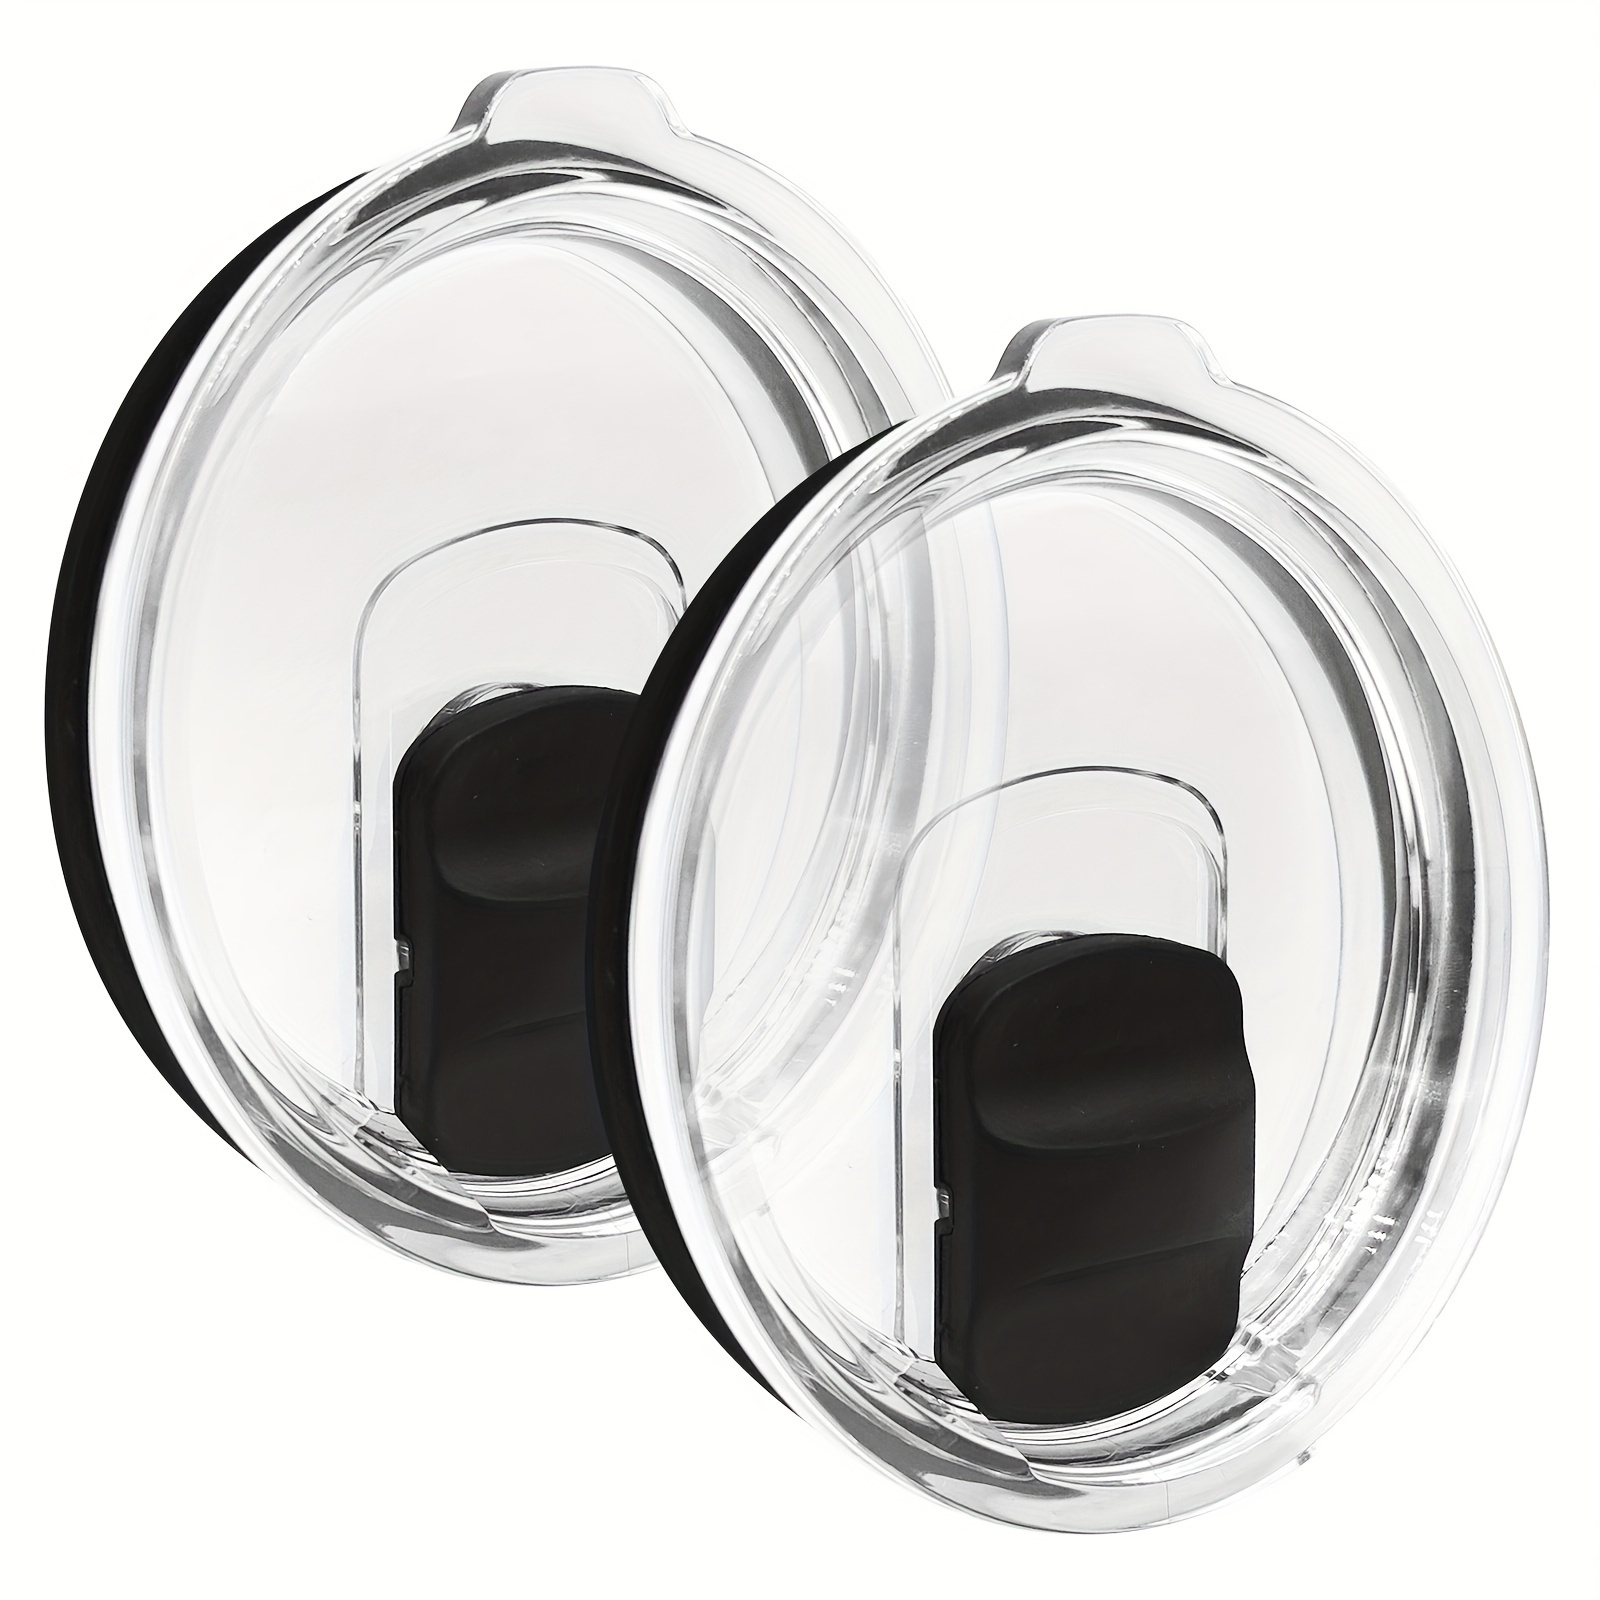 

2pcs Magnetic Replacement Lids For Tumbler, Clear Glass Cup Covers, Slide Closure Spill-proof Seal, Fit 20 Oz & 30 Oz Models, Dishwasher Safe